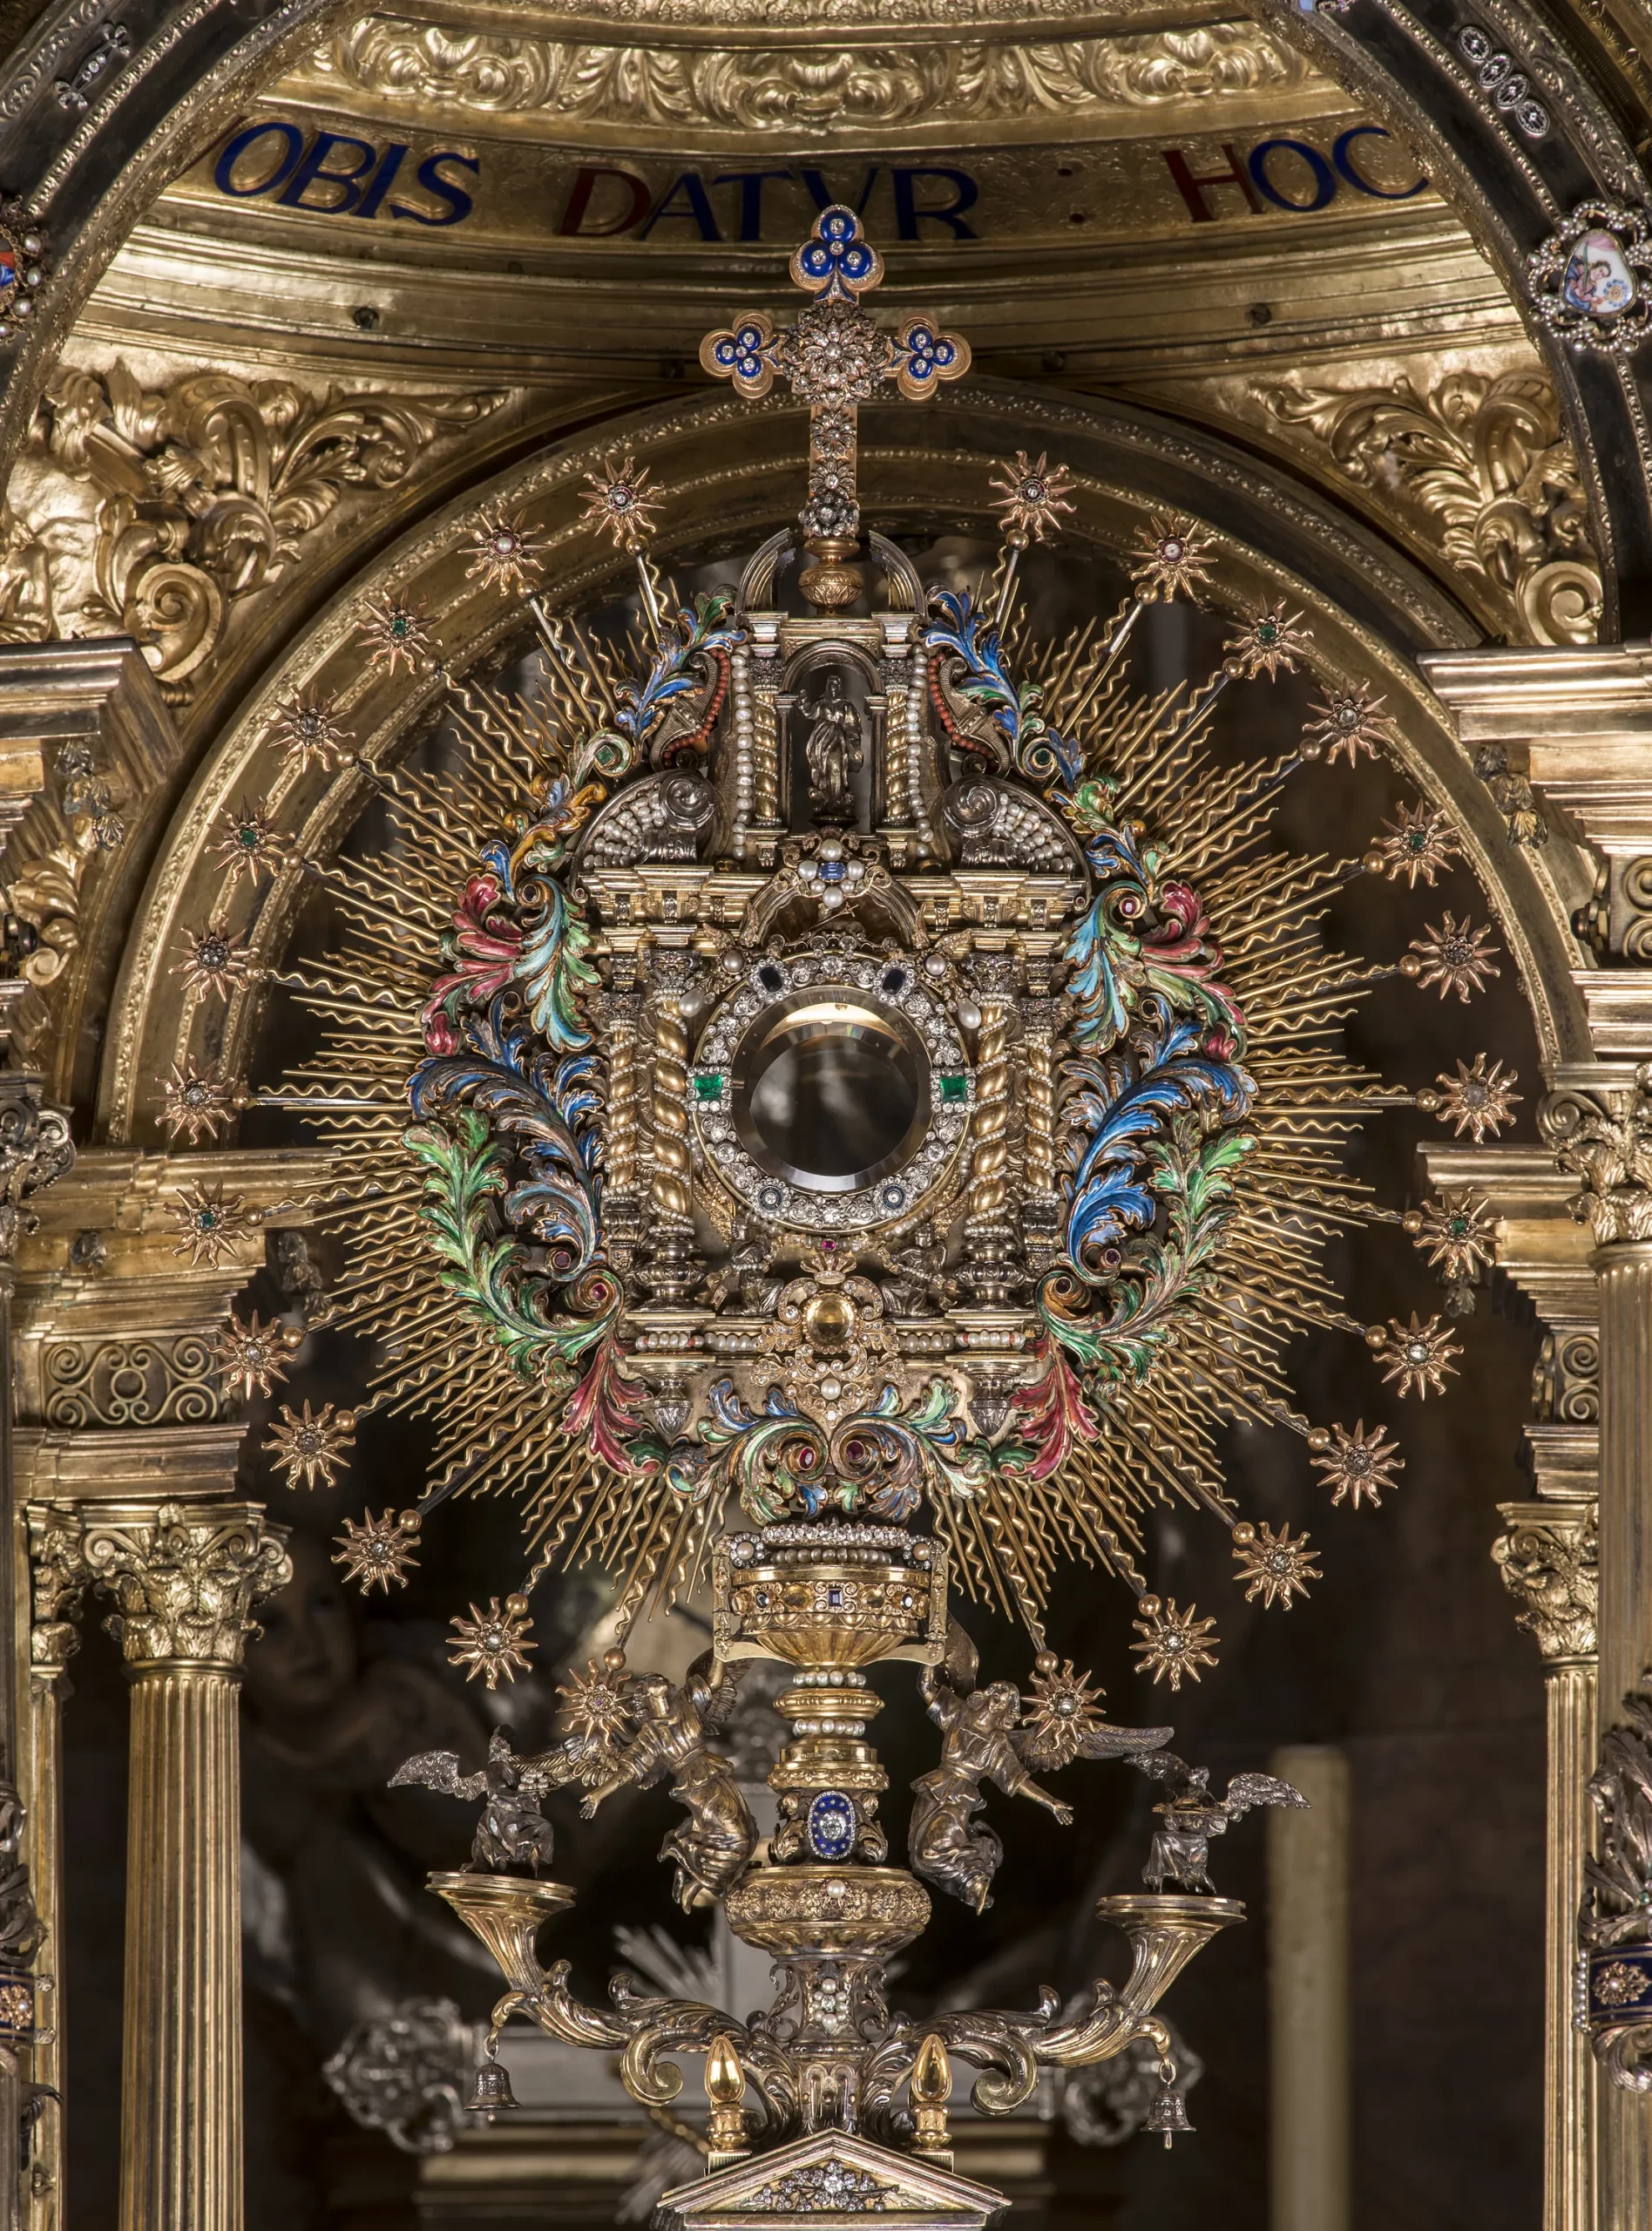 There are 159 sculptures adorning the monstrance used in the annual Corpus Christi procession in Valencia, Spain, including biblical scenes from the Old Testament up to the Good Shepherd and the risen Christ. The apostles and doctors of the Church adorn the host, and Eucharistic miracles are depicted. Saints particularly devoted to the Eucharist are part of the multitude of adorers, as is Pope Pius X, known as the "pope of the Eucharist" since he encouraged frequent reception of the sacrament and lowered the age for first Communion. June 2, 2024. Credit:Archivalencia/Catedral VLC